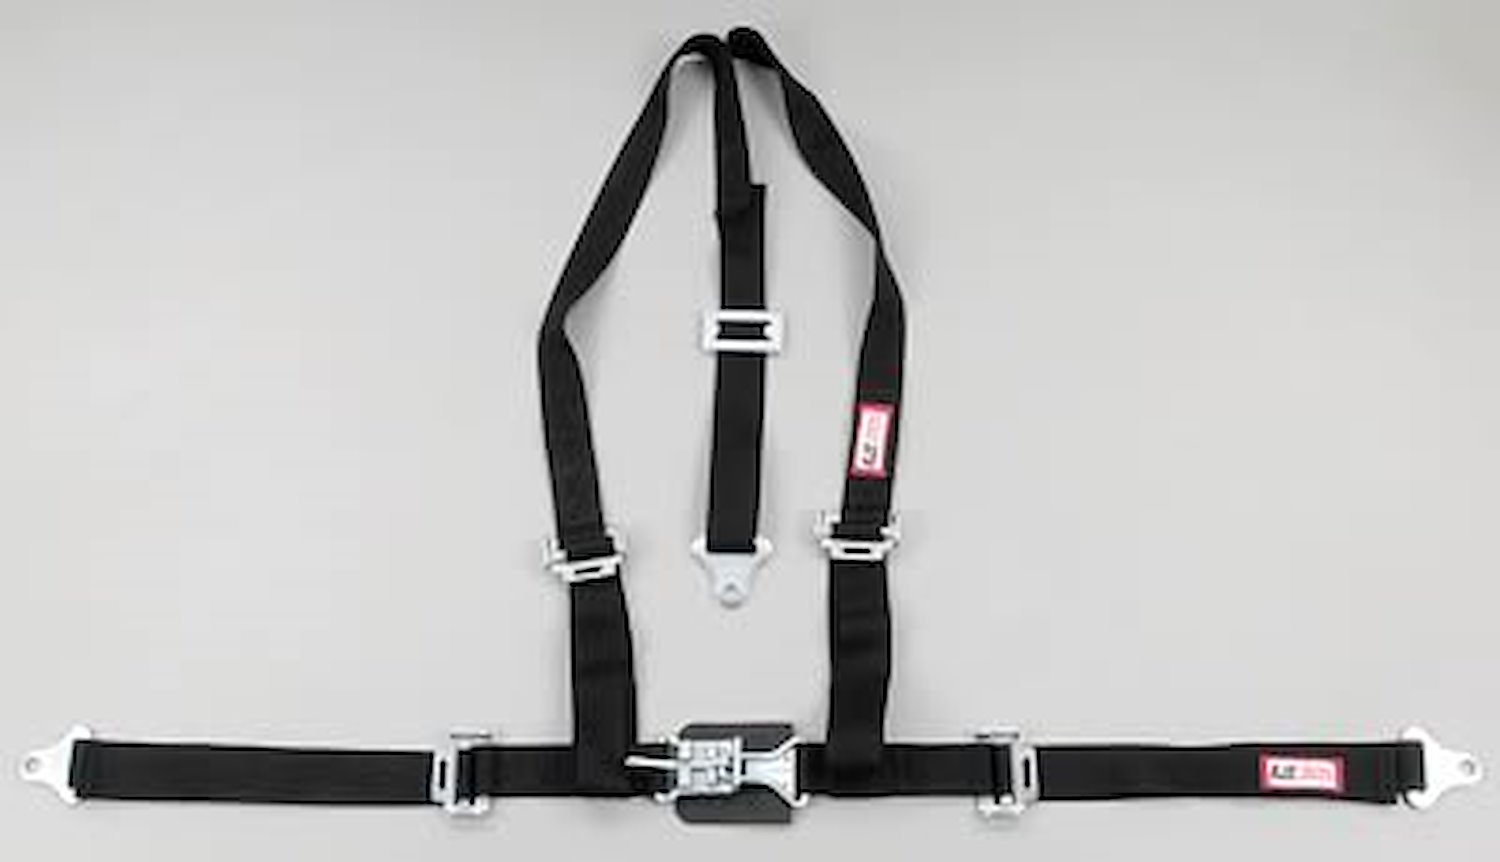 NON-SFI L&L HARNESS 3 PULL DOWN Lap Belt SNAP SEWN IN 2 S.H. Individual FLOOR Mount w/STERNUM STRAP WRAP/BOLT GRAY